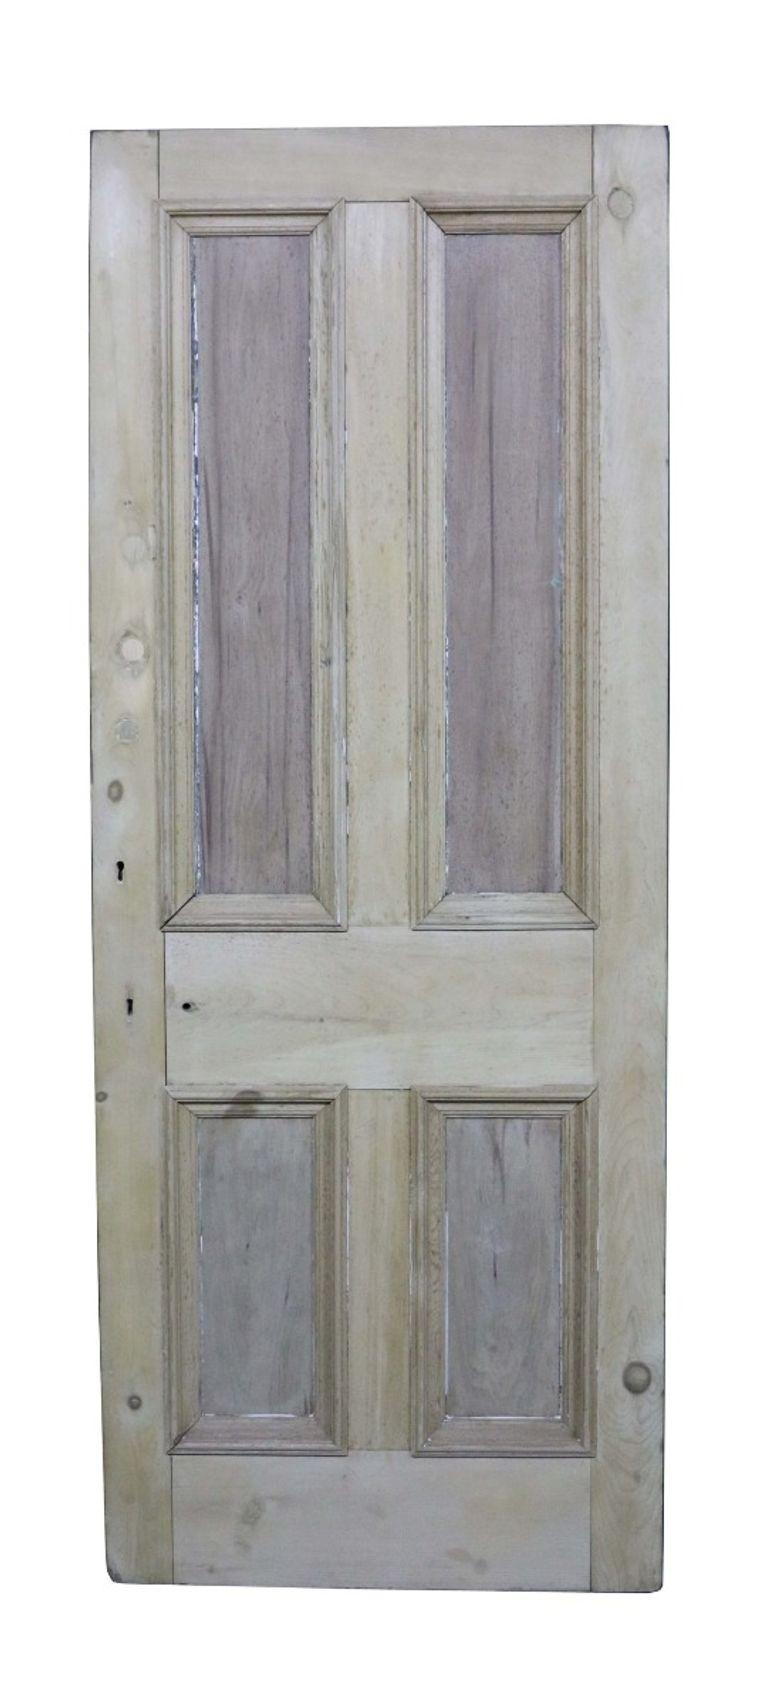 A salvaged exterior door constructed from pine in a four panel configuration.